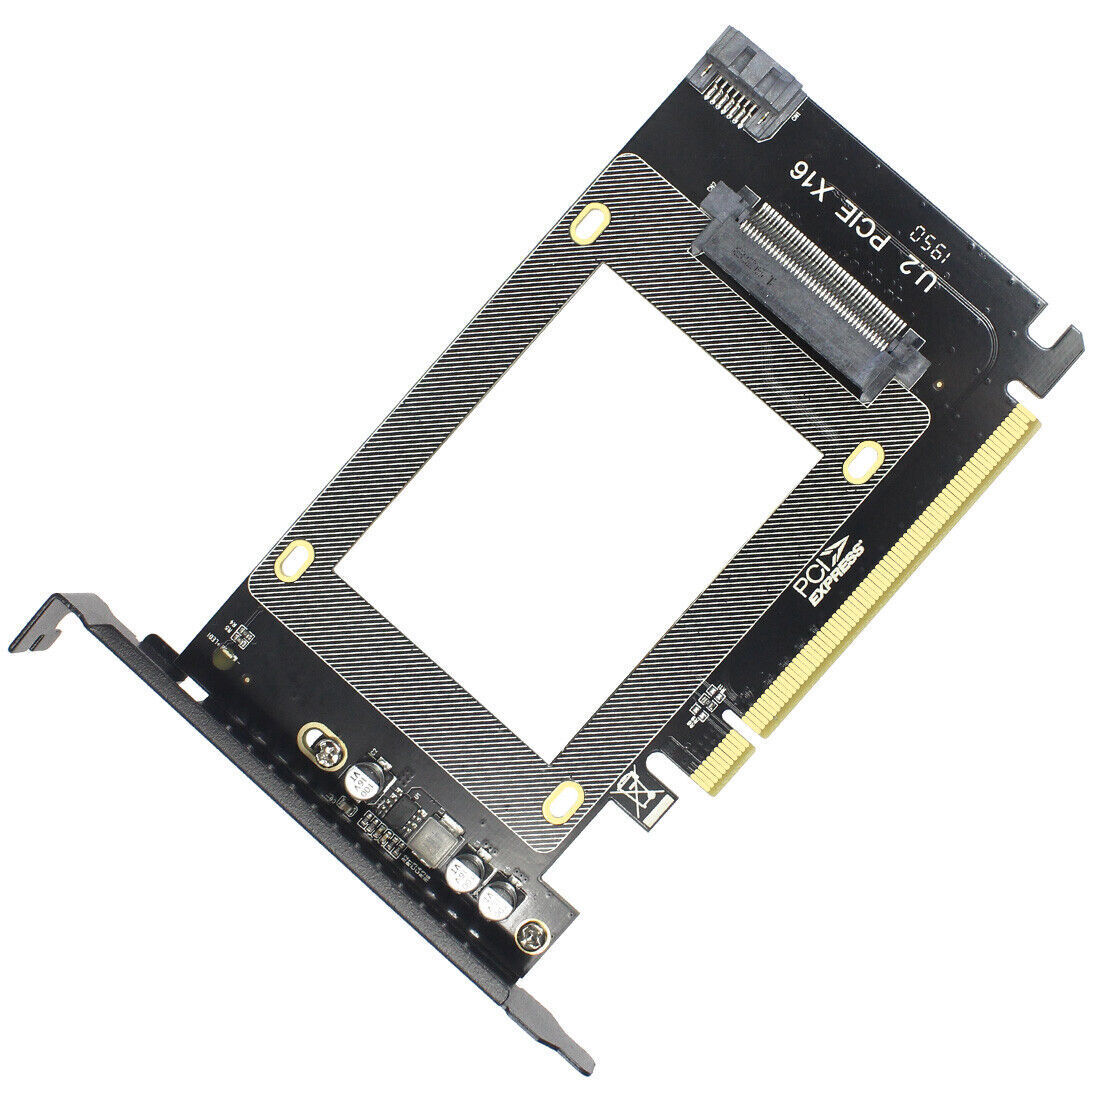 JEYI U.2 SSD to PCIe X16 3.0 Adapter SFF-8639 PCIe Adapter PCIe NVMe SSD Adapter